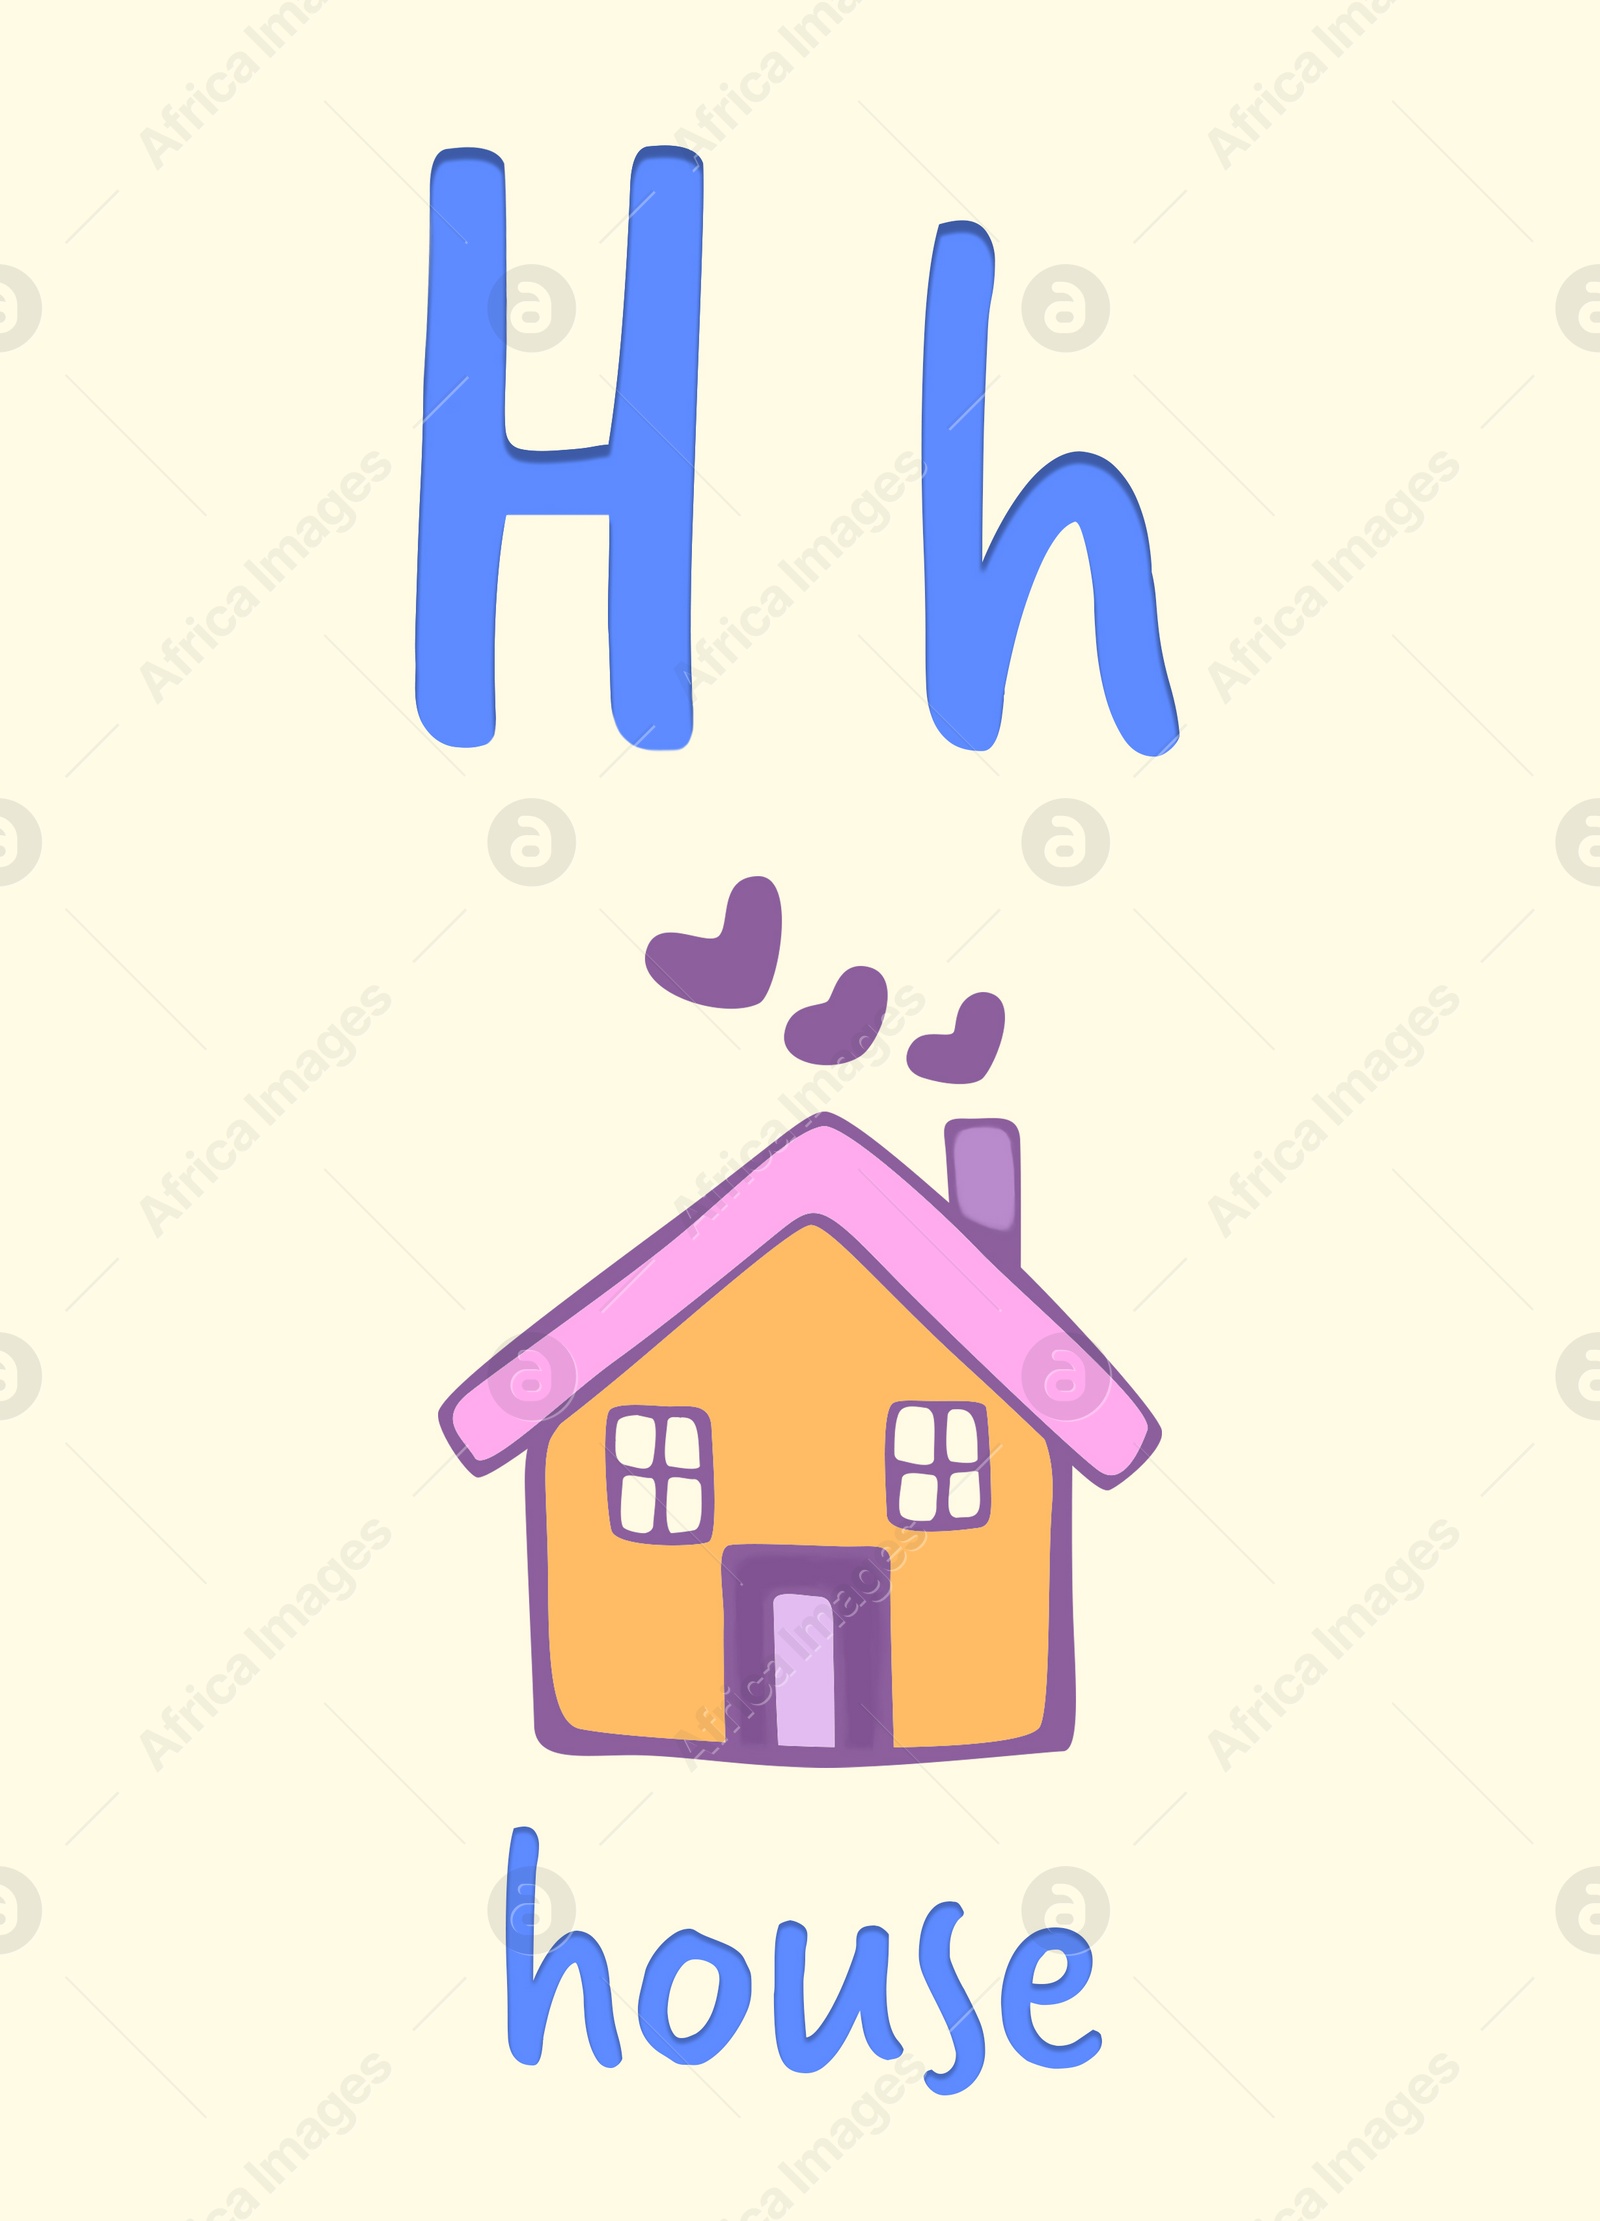 Illustration of Learning English alphabet. Card with letter H and house, illustration